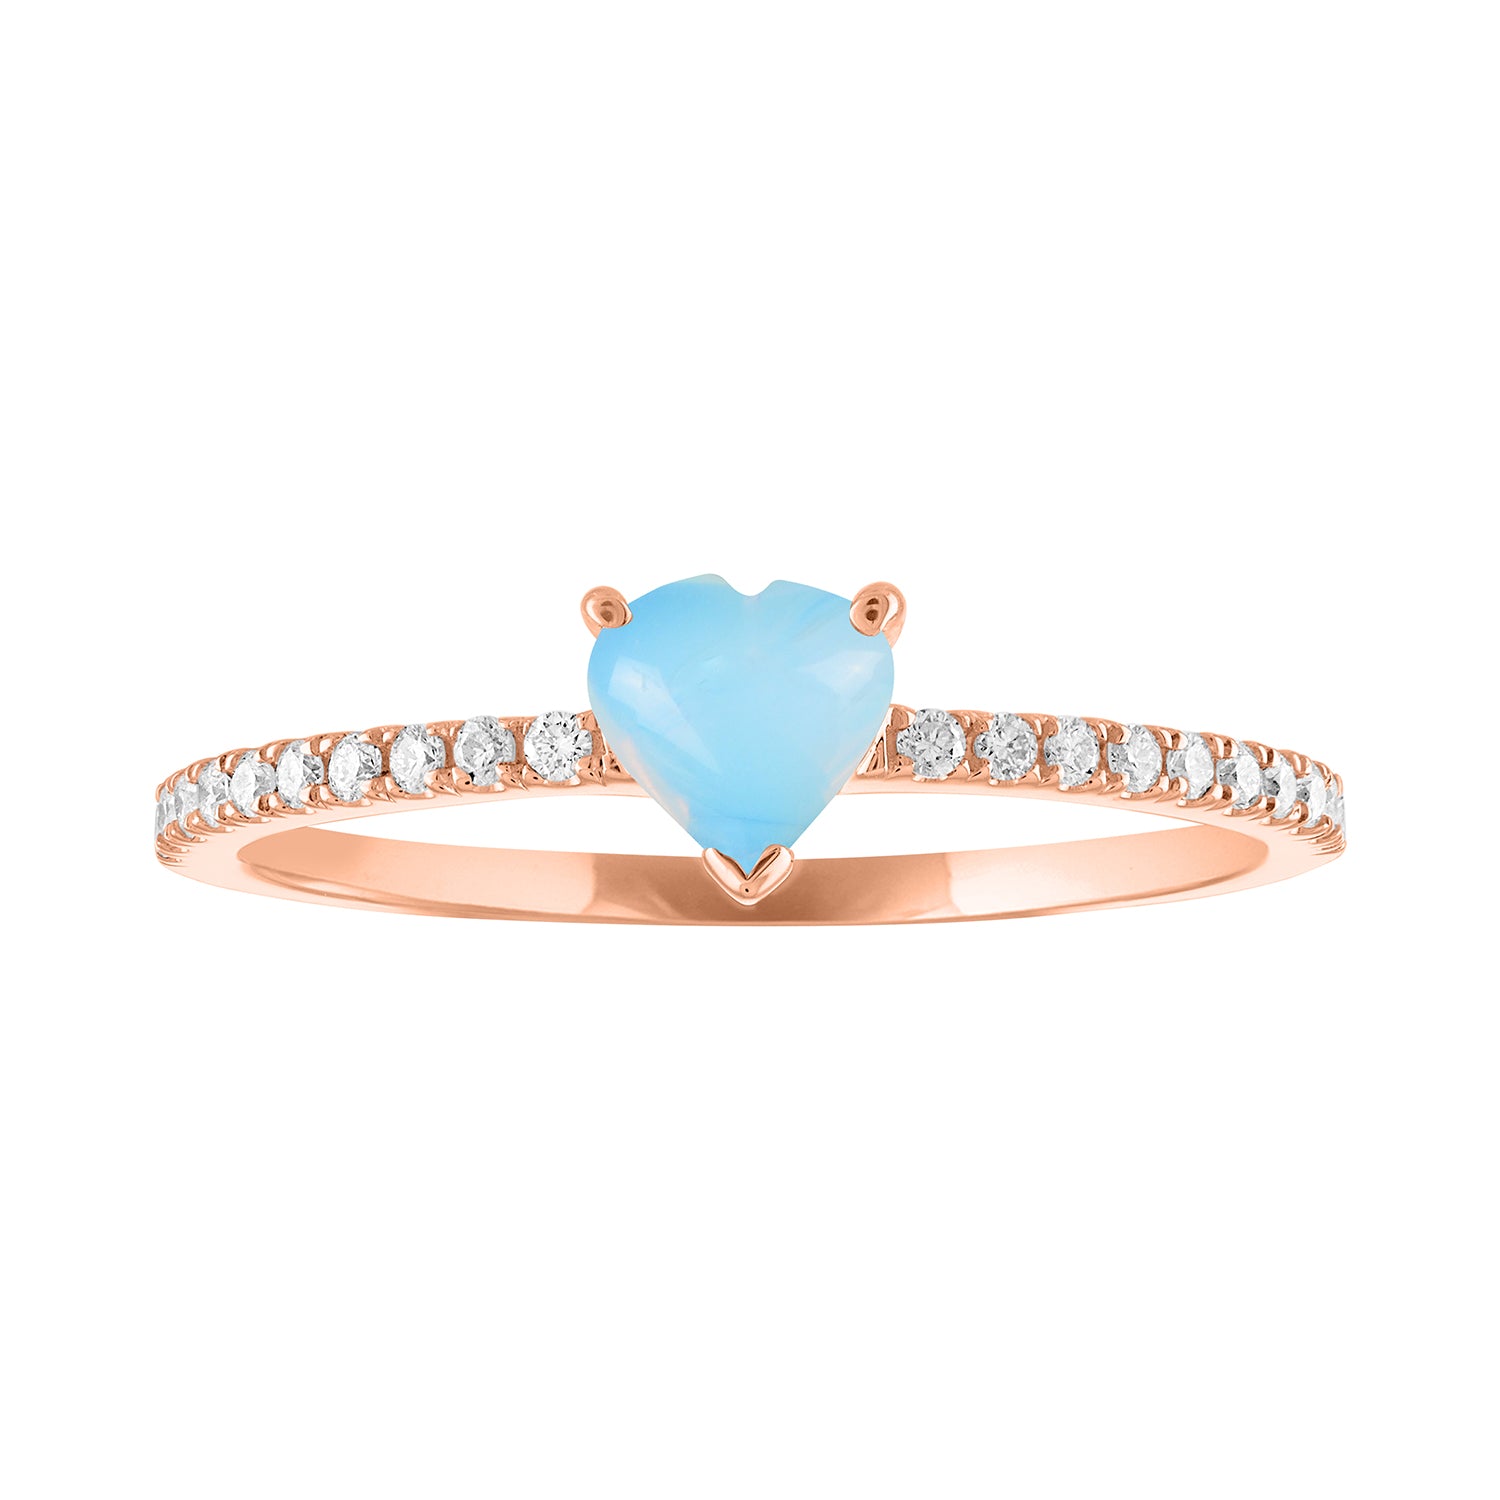 Thin banned rose gold ring with heart shaped moonstone and round diamonds on the shank